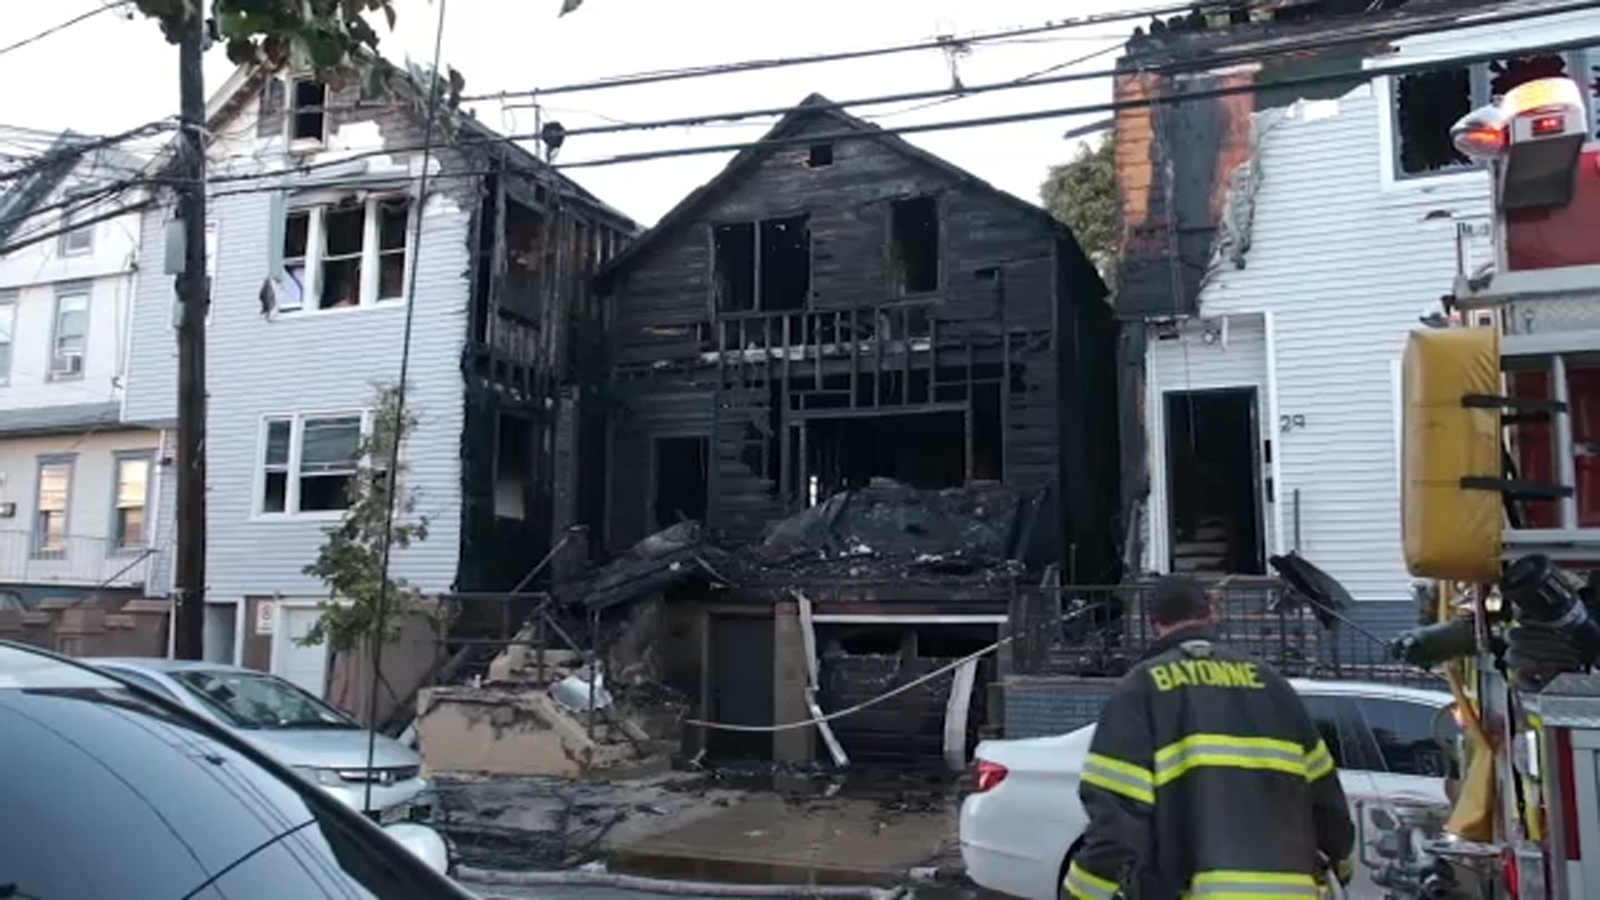 Bayonne fire: Four-alarm blaze rips through NJ homes, Red Cross assisting 21 people [Video]